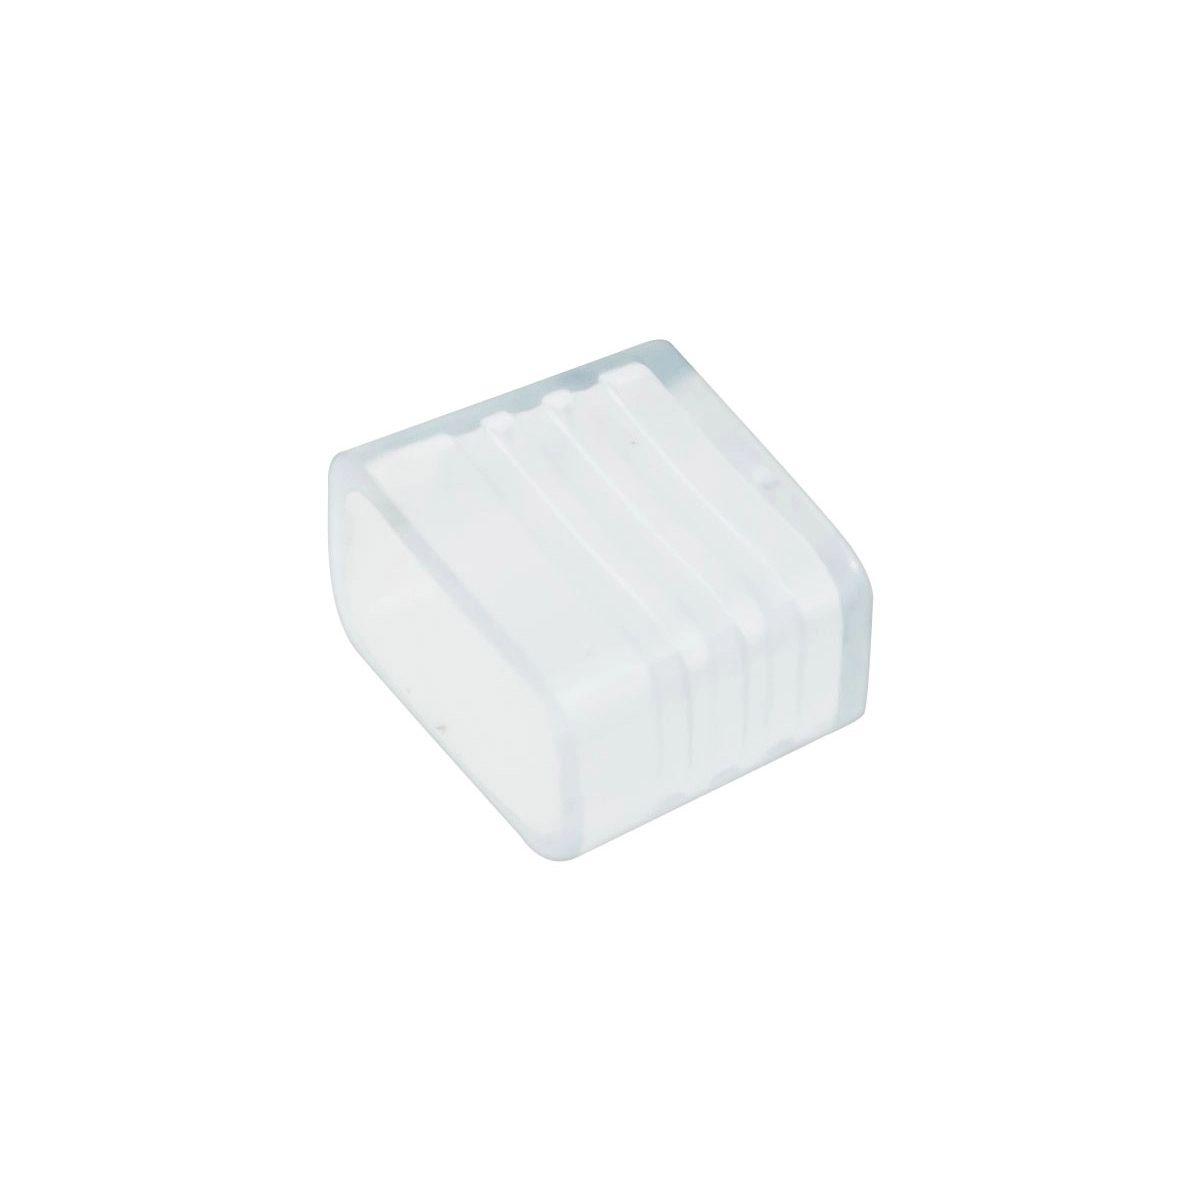 Hybrid 2 End Caps, Pack of 10